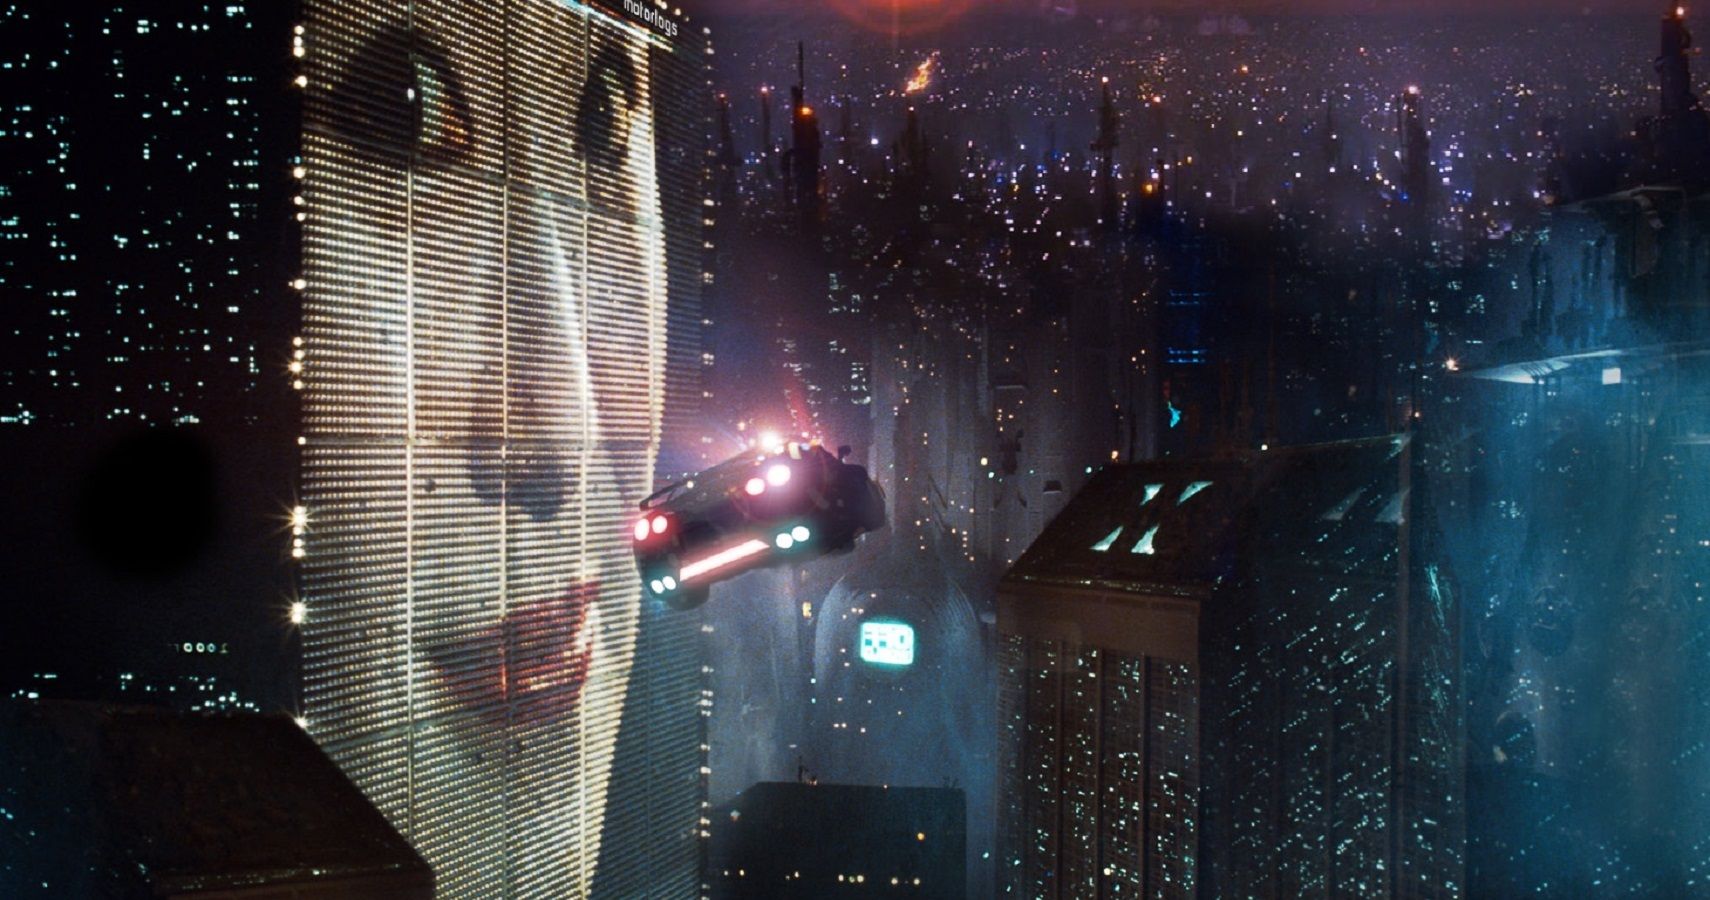 Original 'Blade Runner' vs today's tech: Is that future here? - CNET